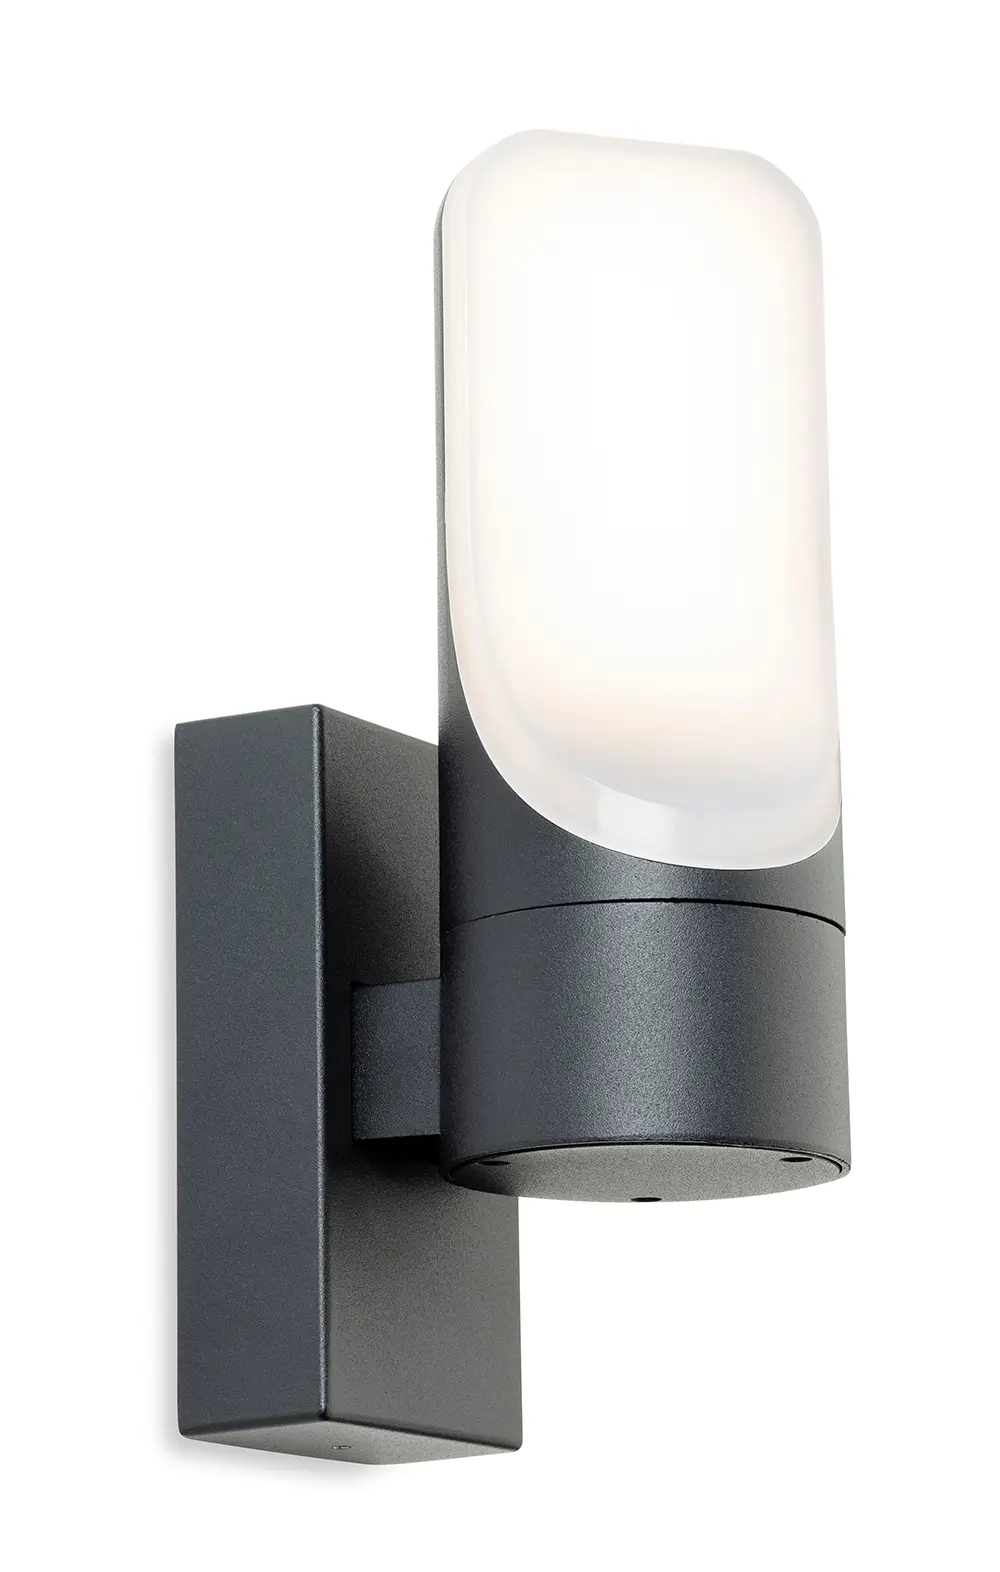 Eve LED Wall Light in Graphite Finish